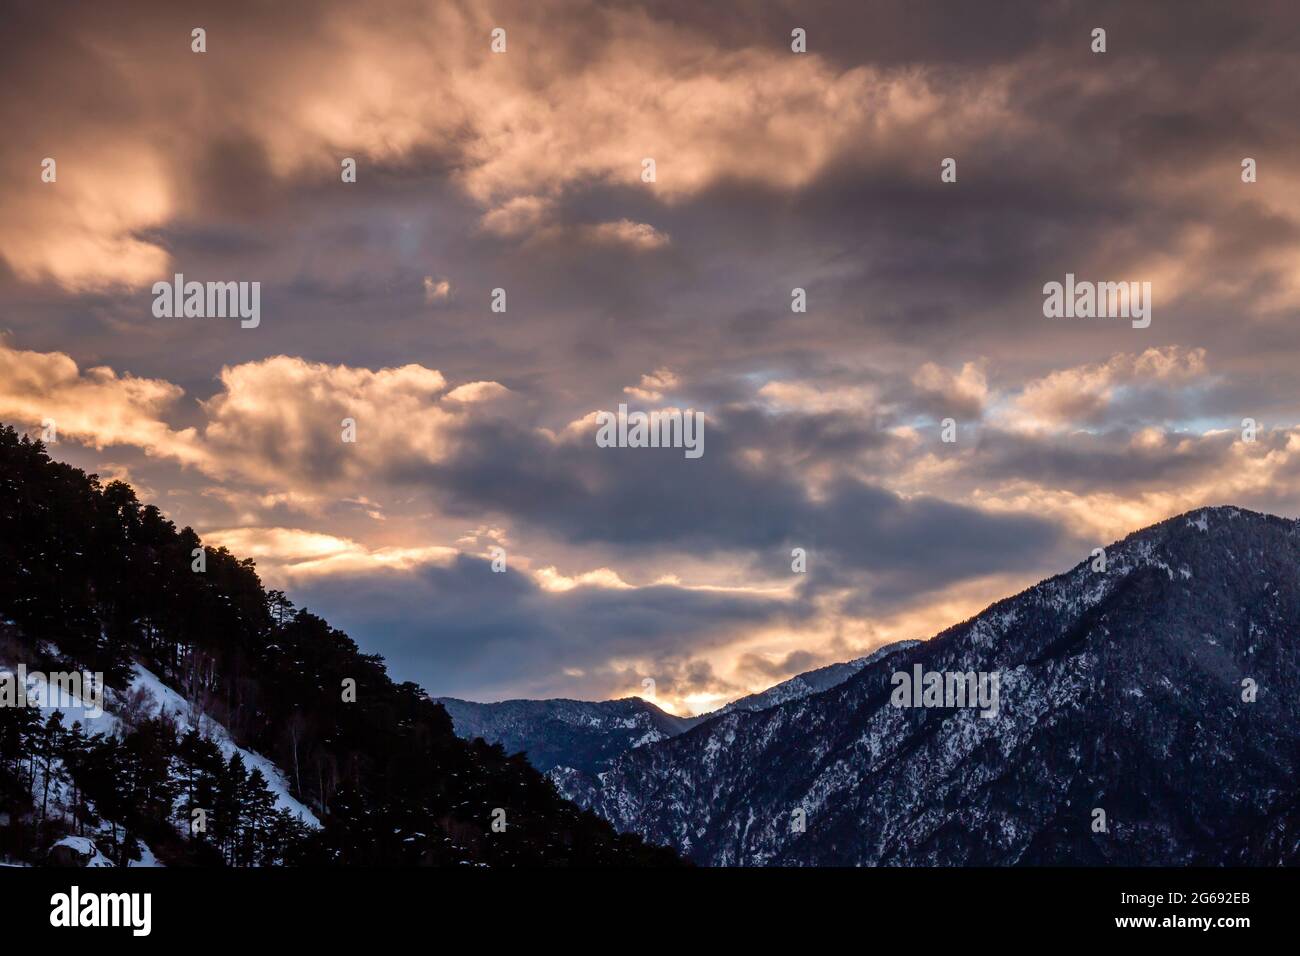 Wintry landscape in the mountains with snow Stock Photo